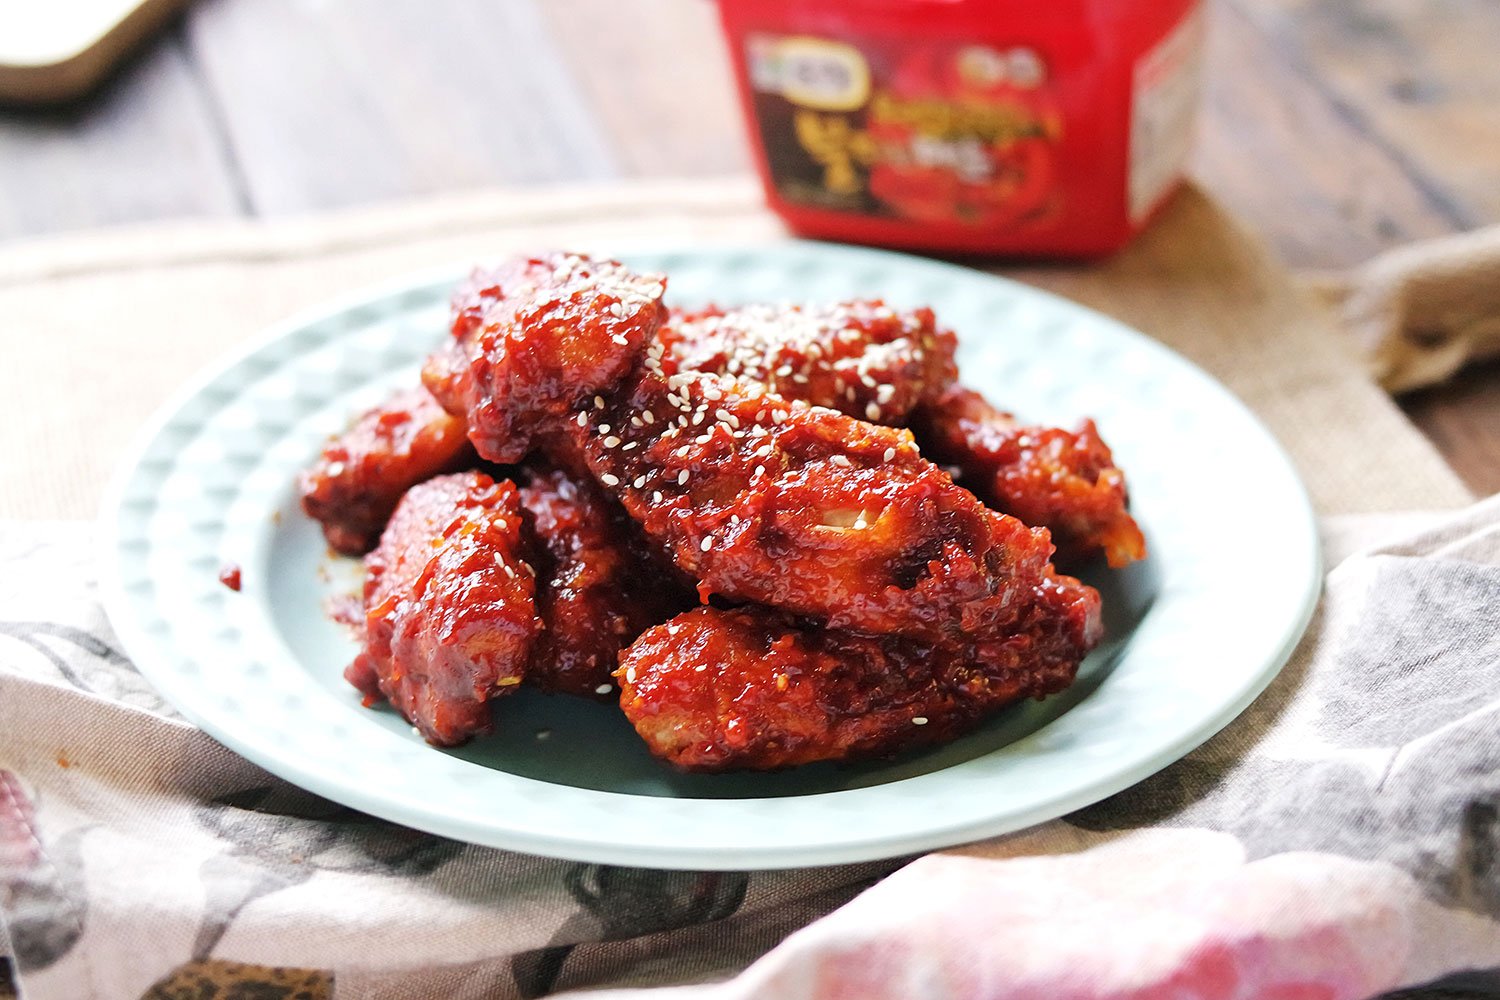 Crispy fried chicken is covered in a korean chilli paste glaze and garnished with sesame seeds